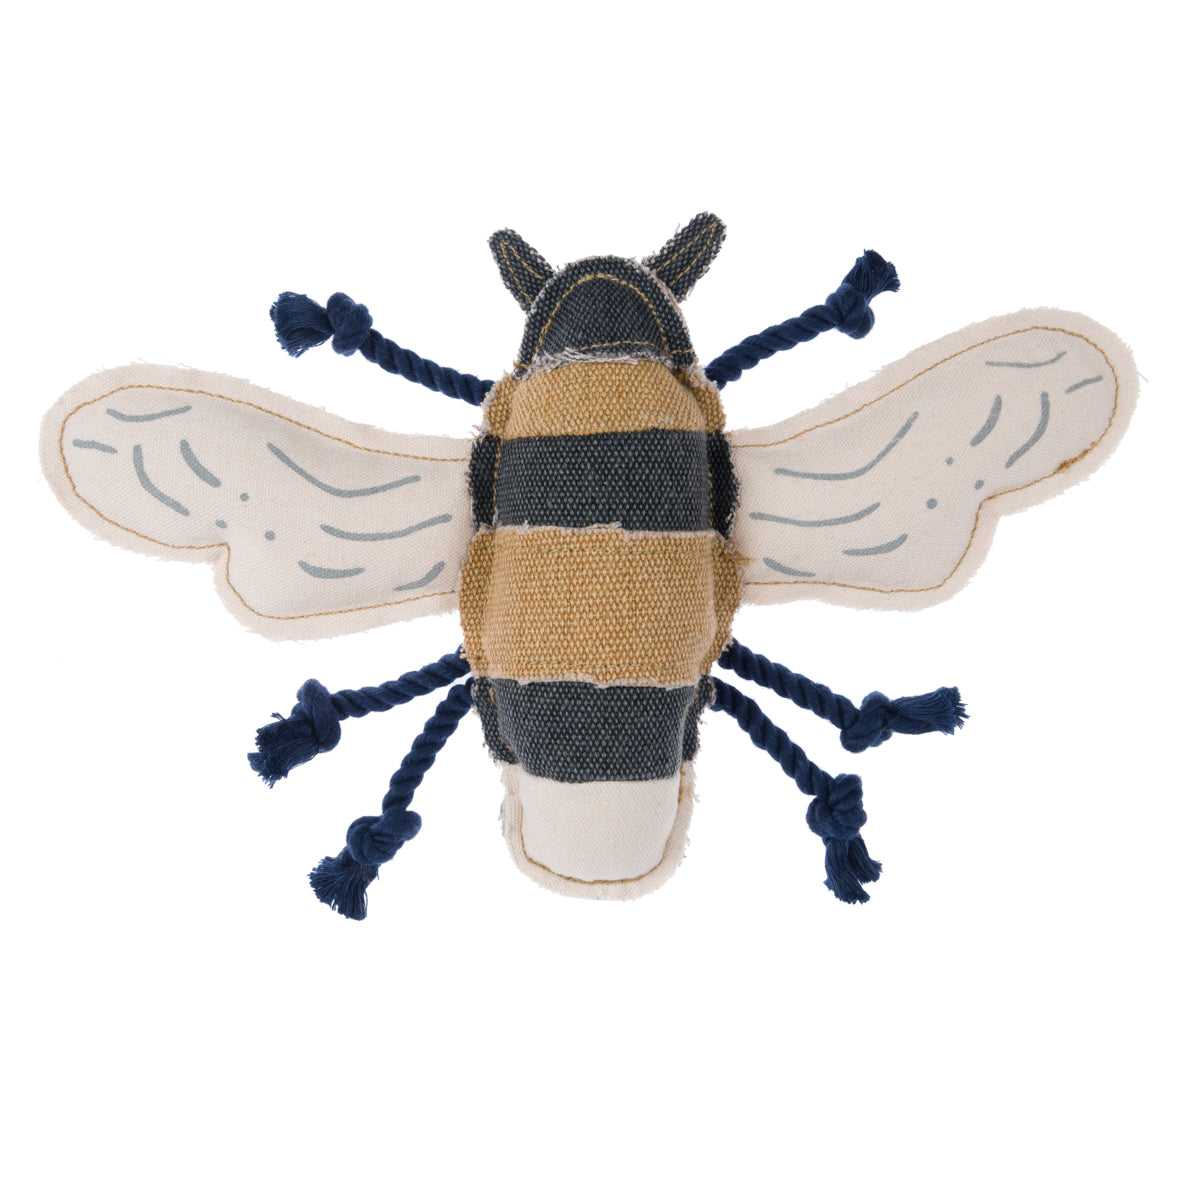 Dog toy shaped as a bee with rope legs by Sophie Allport